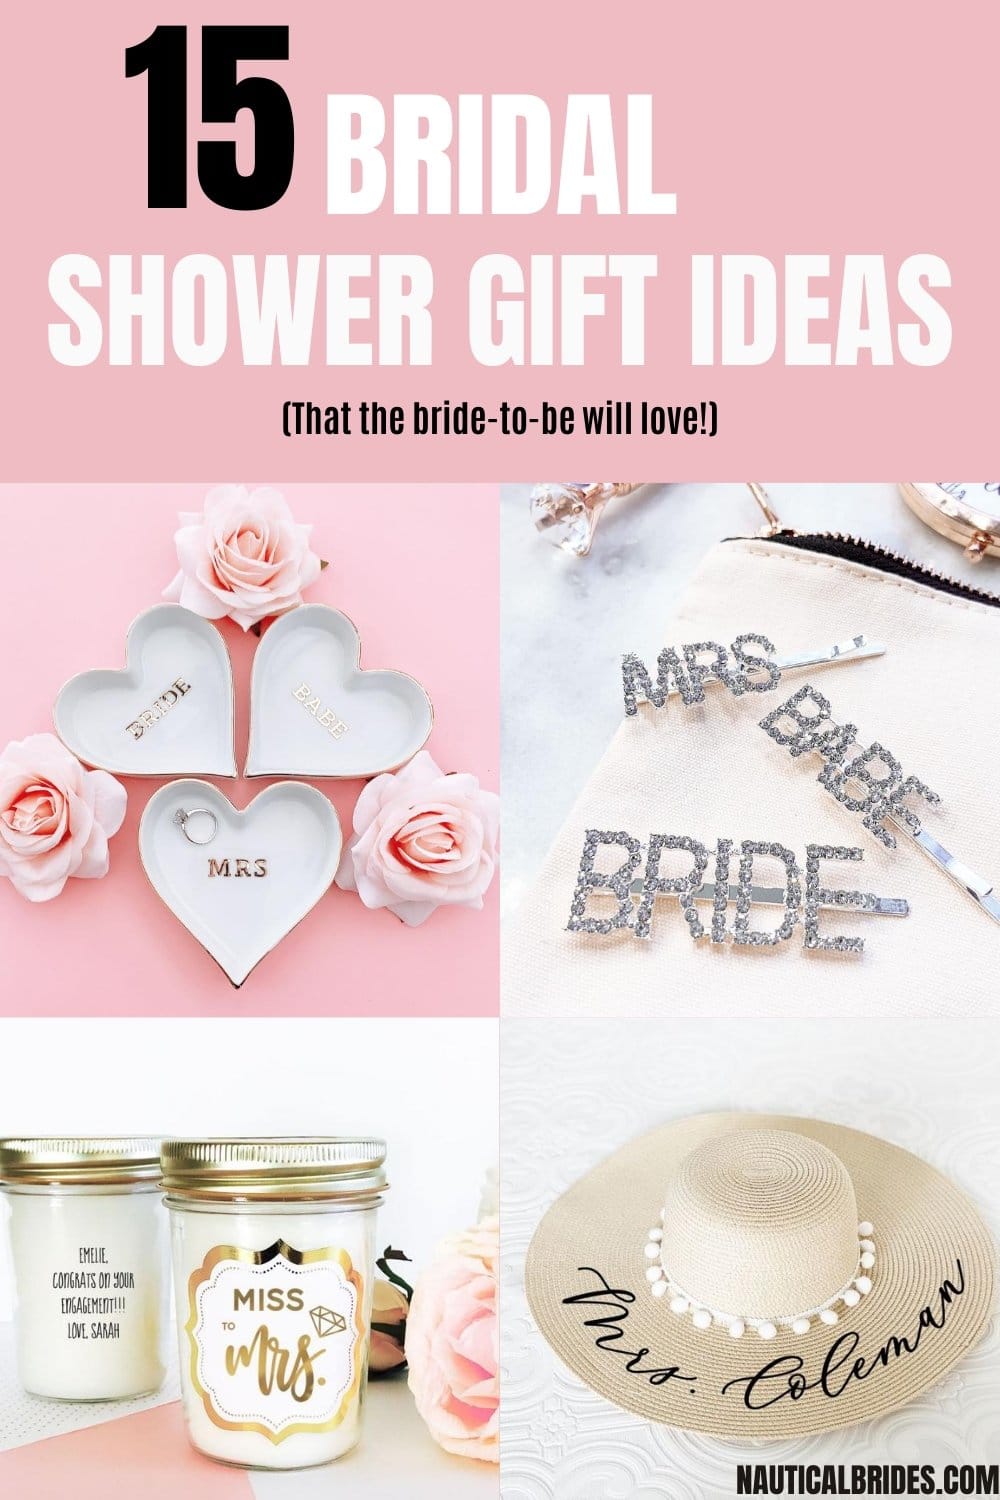 16 Bridal Shower Gift Ideas for Every Type of Bride